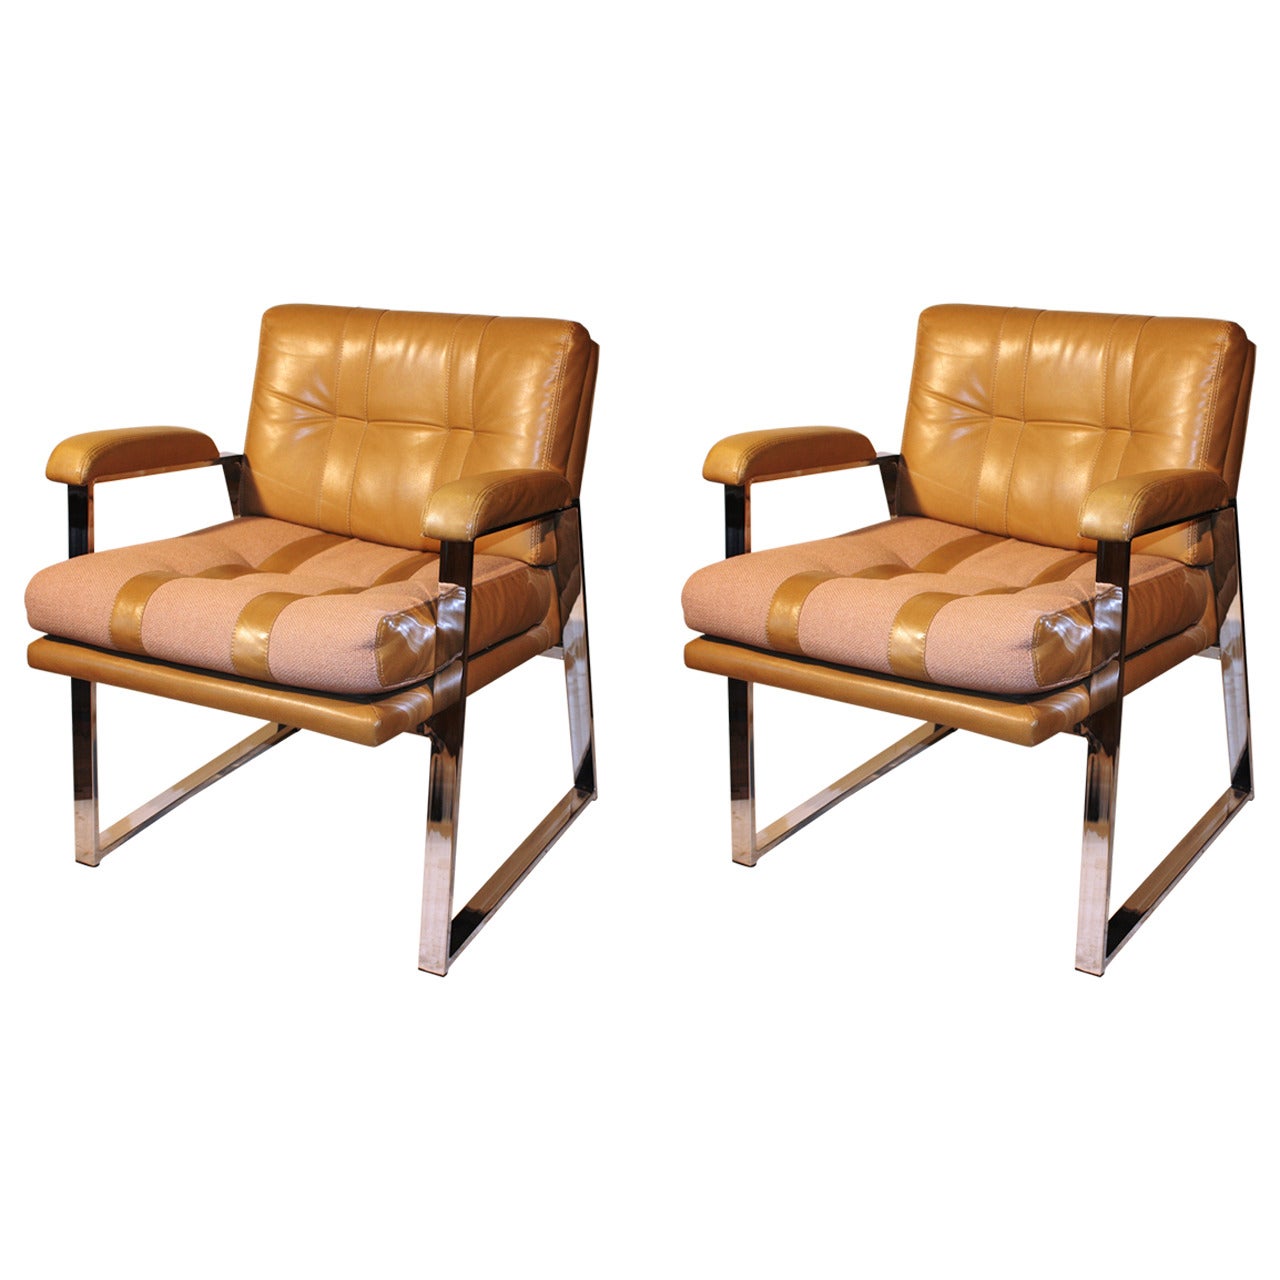 Pair of Milo Baughman Style Chrome Armchairs by Patrician Furniture